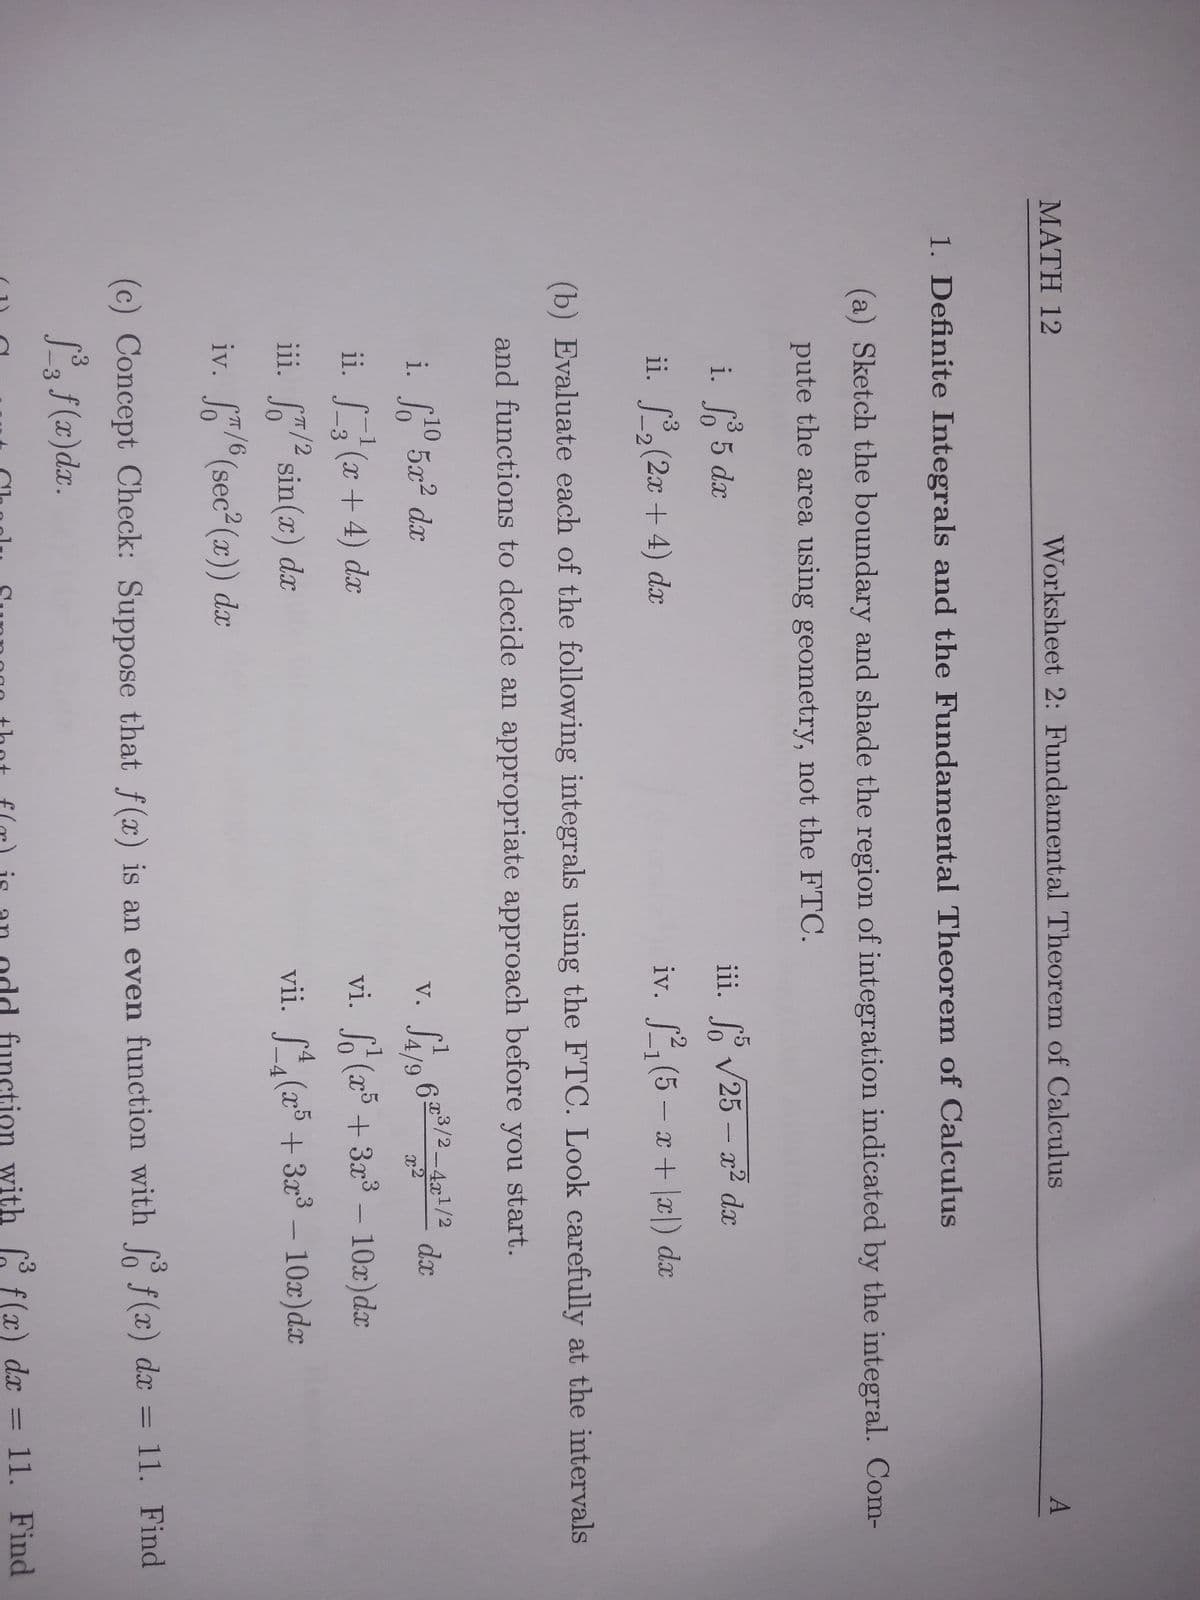 MATH 12
Worksheet 2: Fundamental Theorem of Calculus
1. Definite Integrals and the Fundamental Theorem of Calculus
(a) Sketch the boundary and shade the region of integration indicated by the integral. Com-
pute the area using geometry, not the FTC.
i. So 5 dx
ii. ³₂ (2x + 4) dx
-2
10
2
i. f¹0 5x² dx
(b) Evaluate each of the following integrals using the FTC. Look carefully at the intervals
and functions to decide an appropriate approach before you start.
1
ii. _3²¹ (x+4) dx
-3
iii. f/2 sin(x) dx
√25 - x² dx
iii.
iv. 2₁ (5-x+x) dx
π/6
iv. f/6 (sec²(x)) dx
dx
vi.
(x5 + 3x³ - 10x)dx
4
vii. f(x5 + 3x³ - 10x) dx
V.
A
6x3/2-4x¹/2
3
(c) Concept Check: Suppose that f(x) is an even function with fo f(x) dx = 11. Find
f³3 f(x) dx.
3 f(x) dx = 11. Find
Chodlr. Suppor that f(r) is an odd function with f f(x) dx